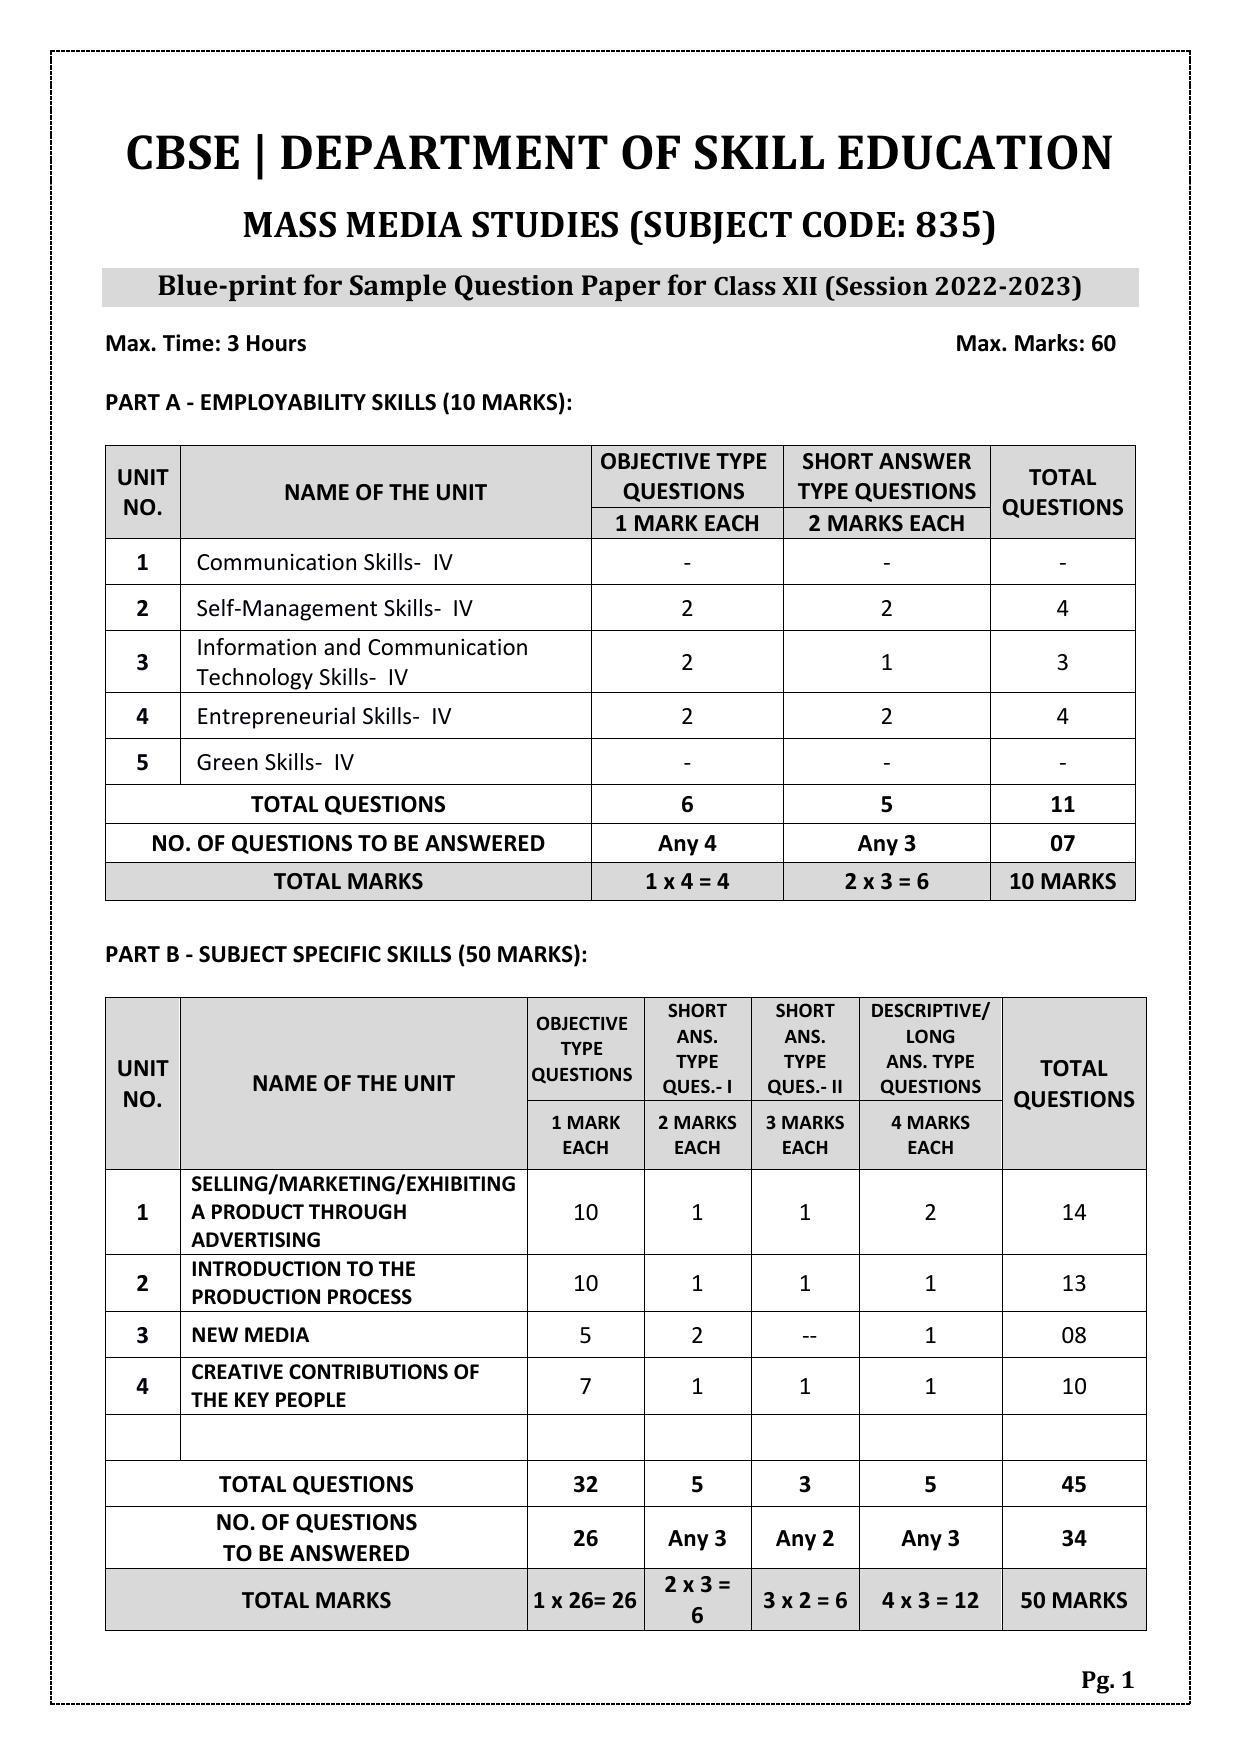 CBSE Class 10 Mass Media Studies (Skill Education) Sample Papers 2023 - Page 1